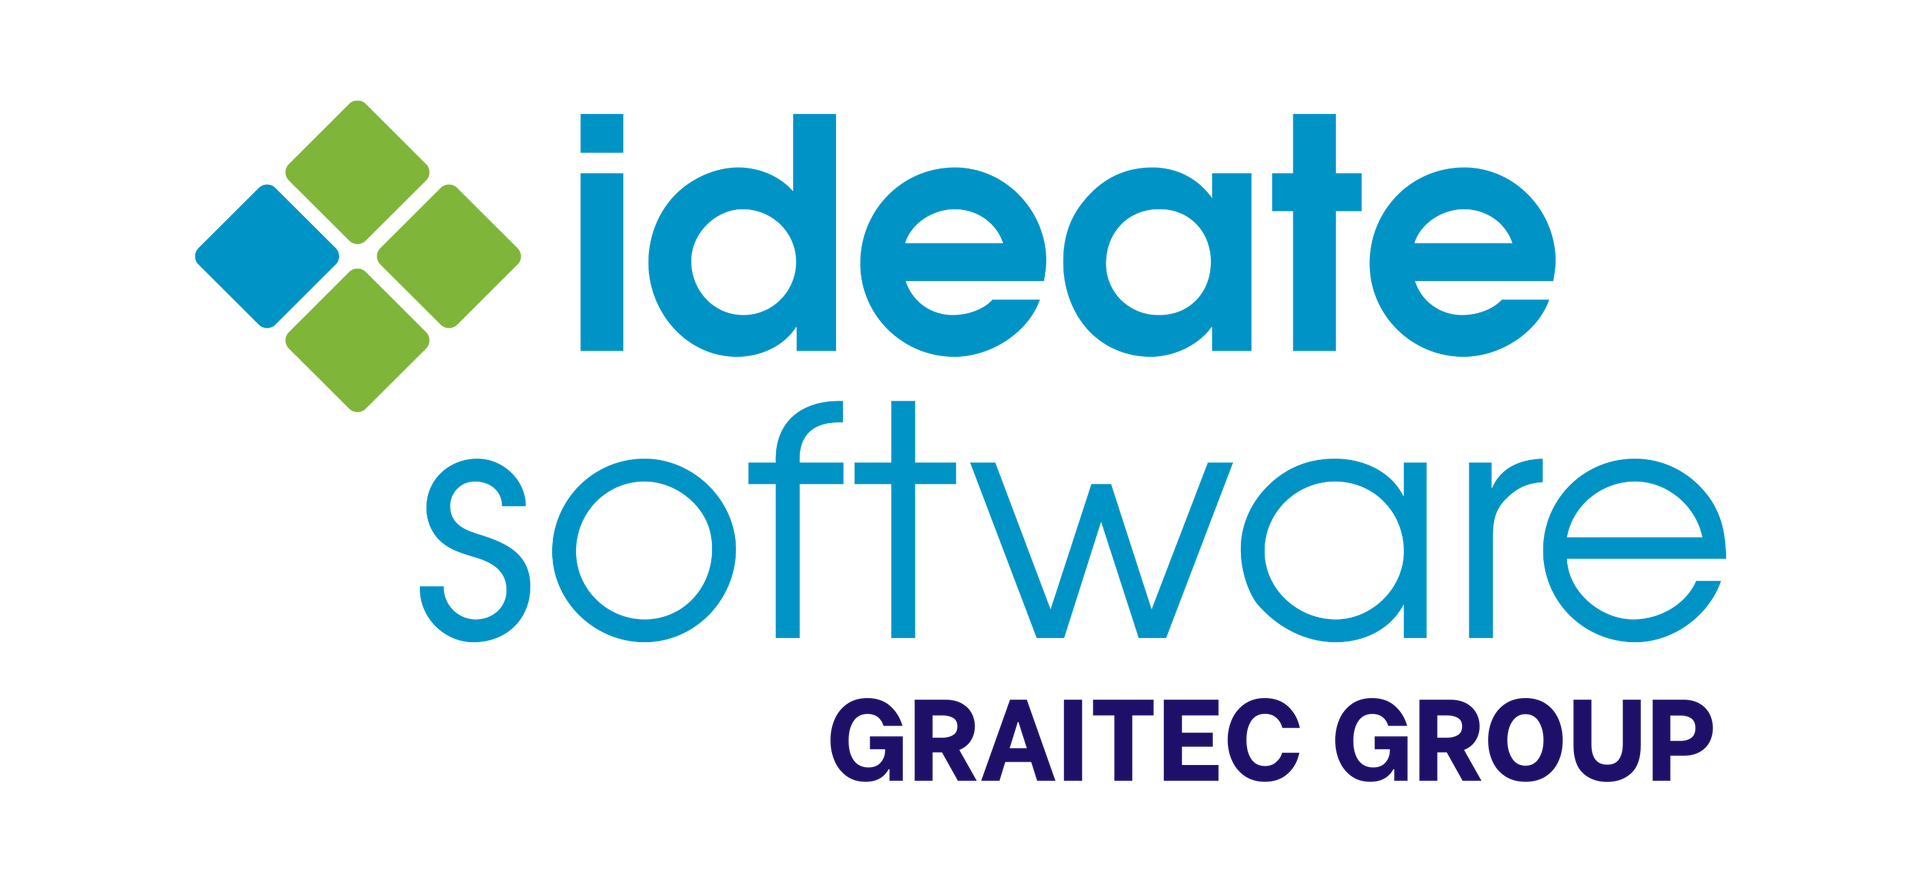 Ideate Software logo